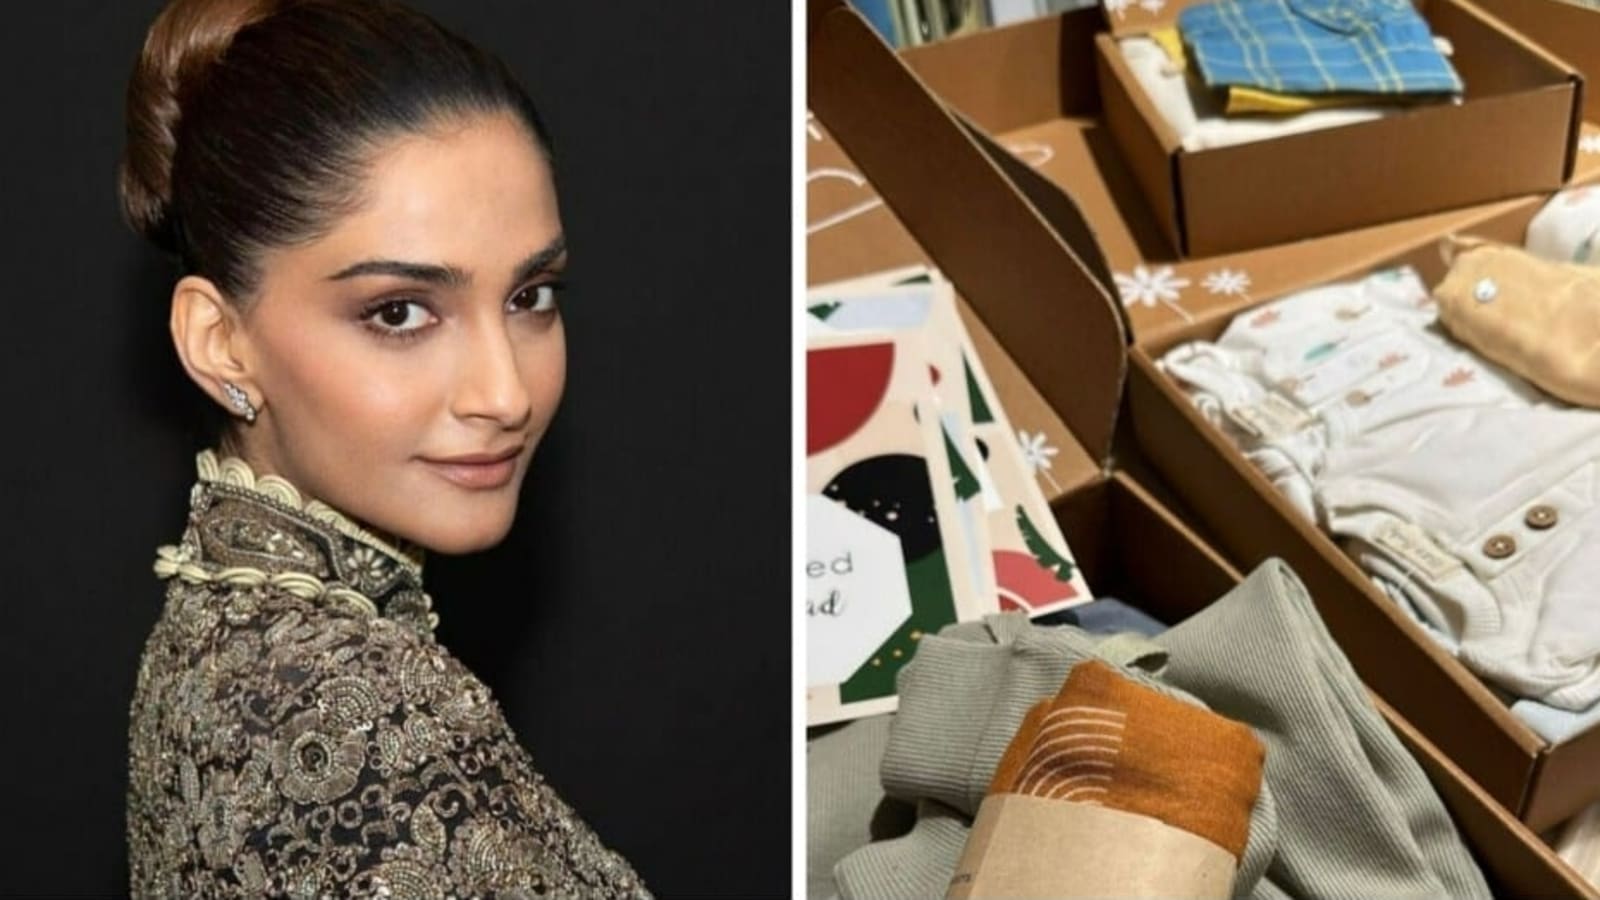 sonam-kapoor-says-son-vayu-is-going-to-look-so-cute-as-she-shares-glimpse-of-his-new-clothes-see-pic